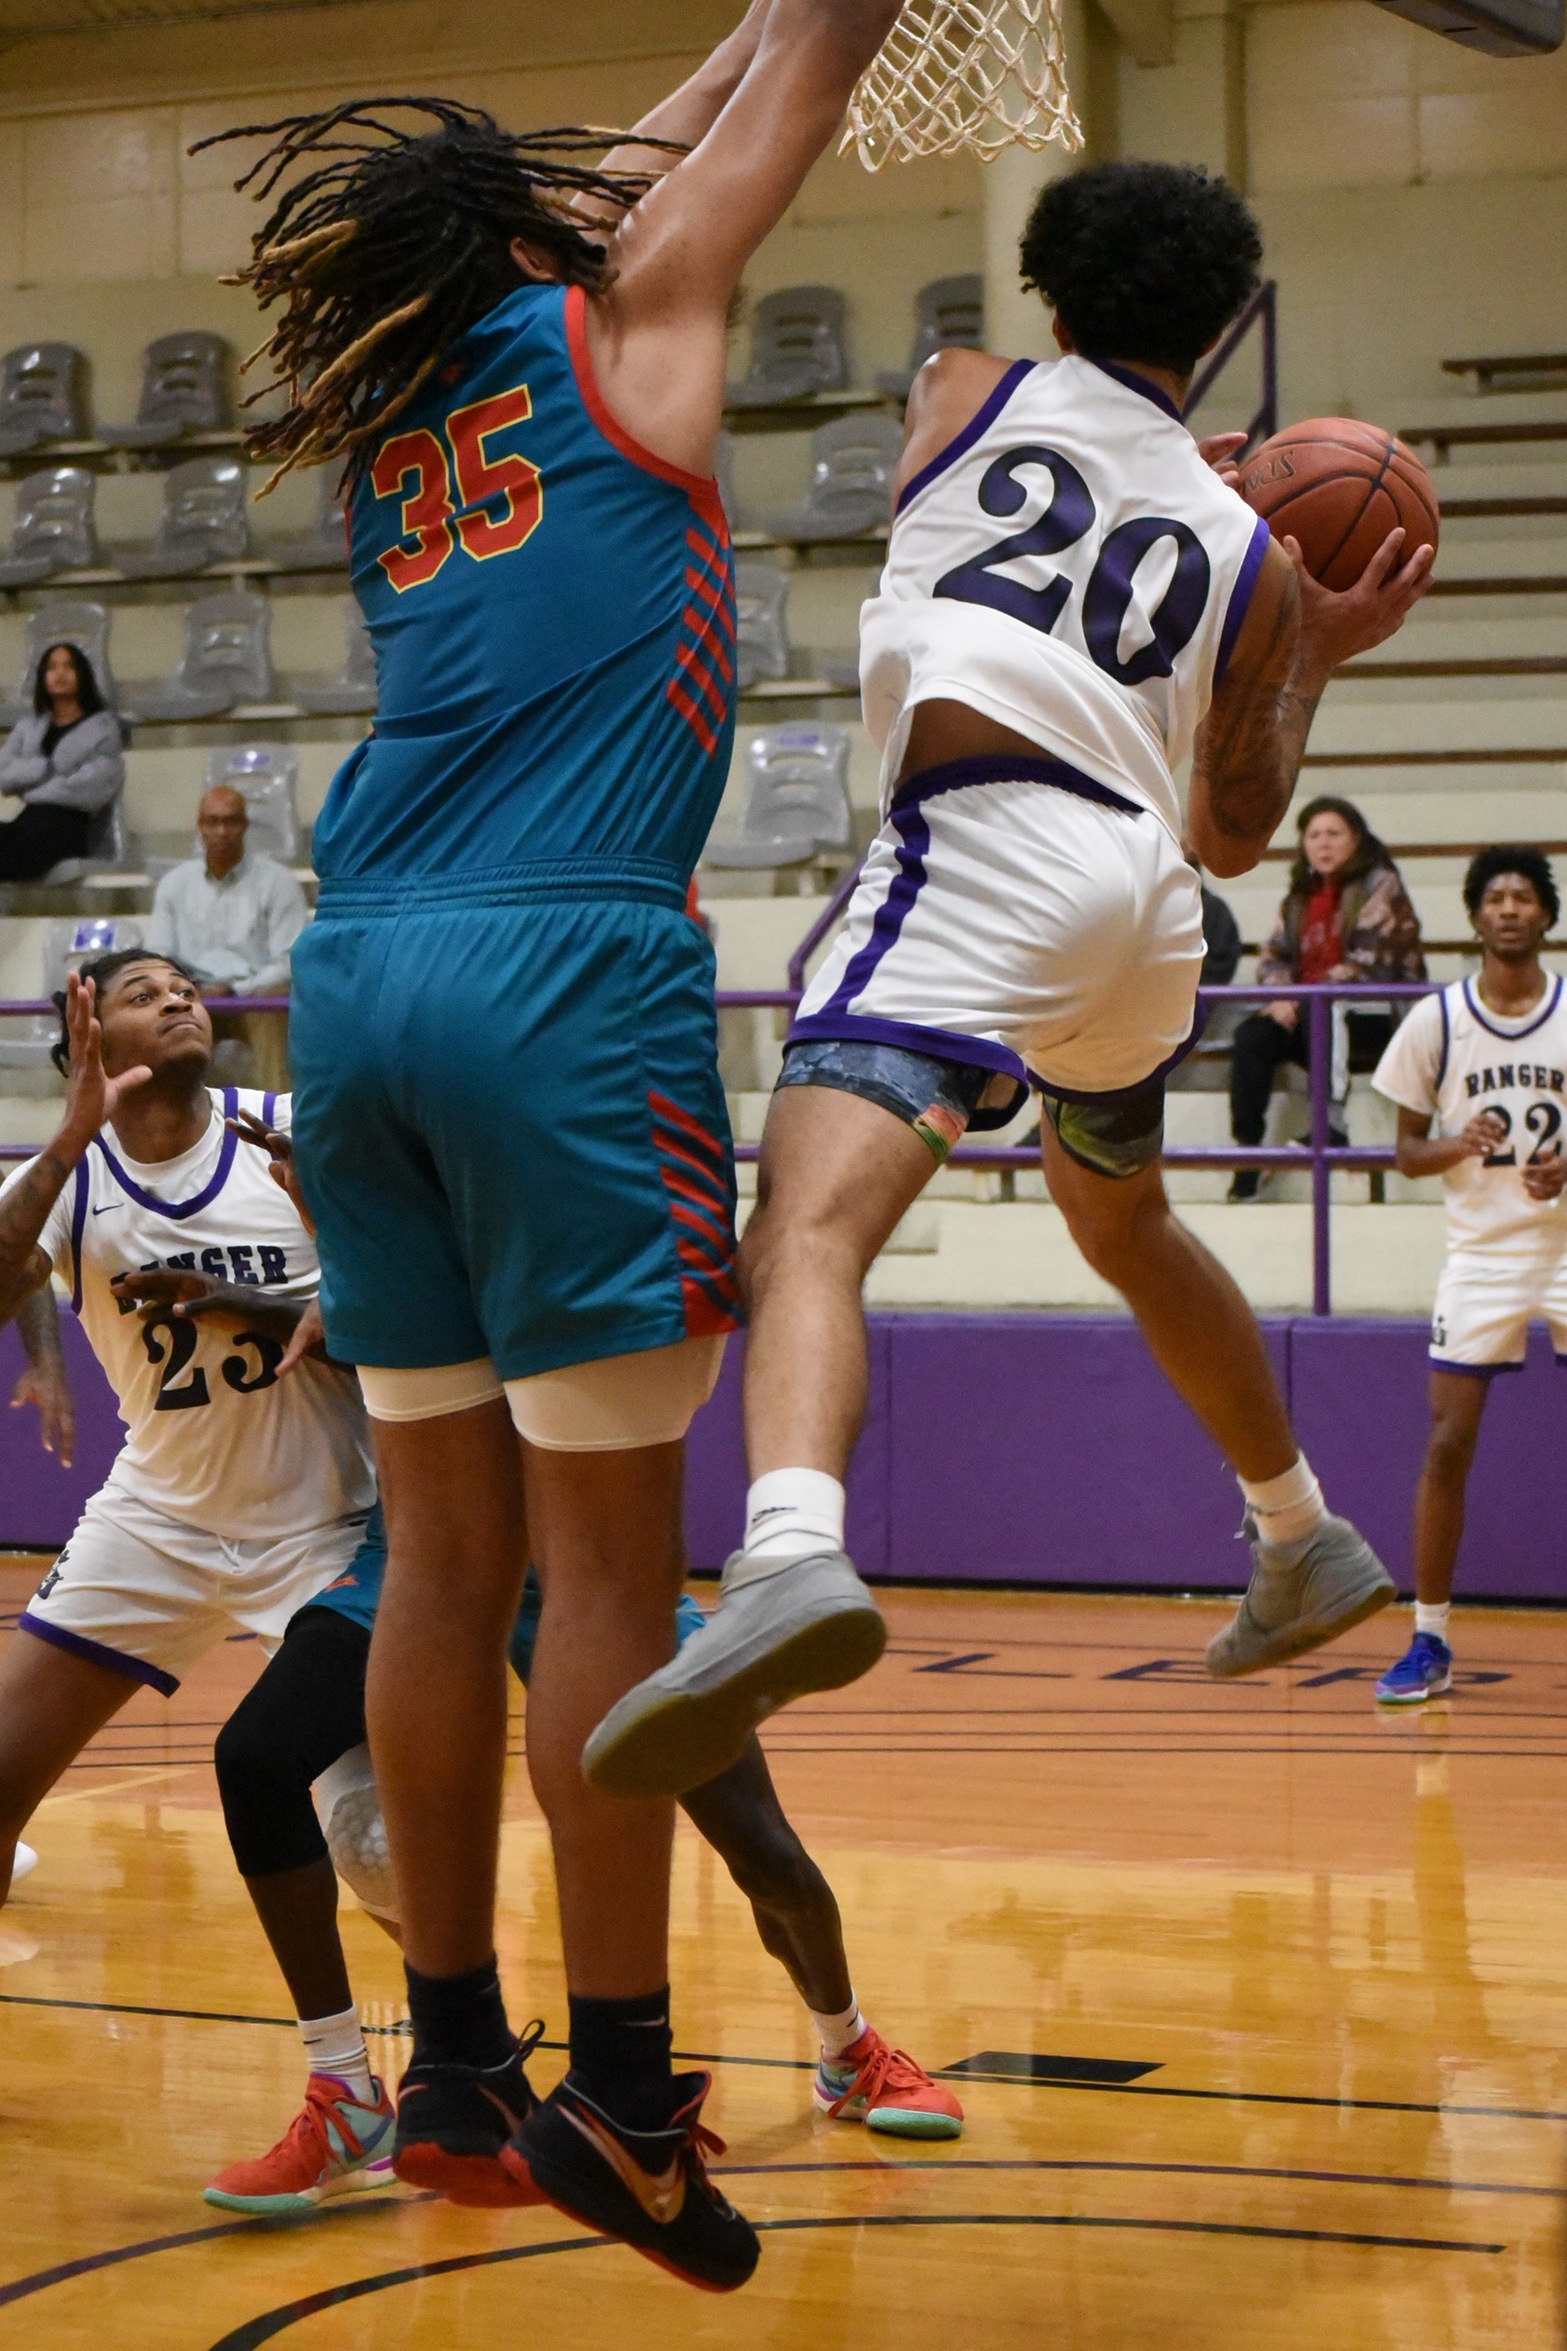 Ranger College came up just short against Collin County Community College